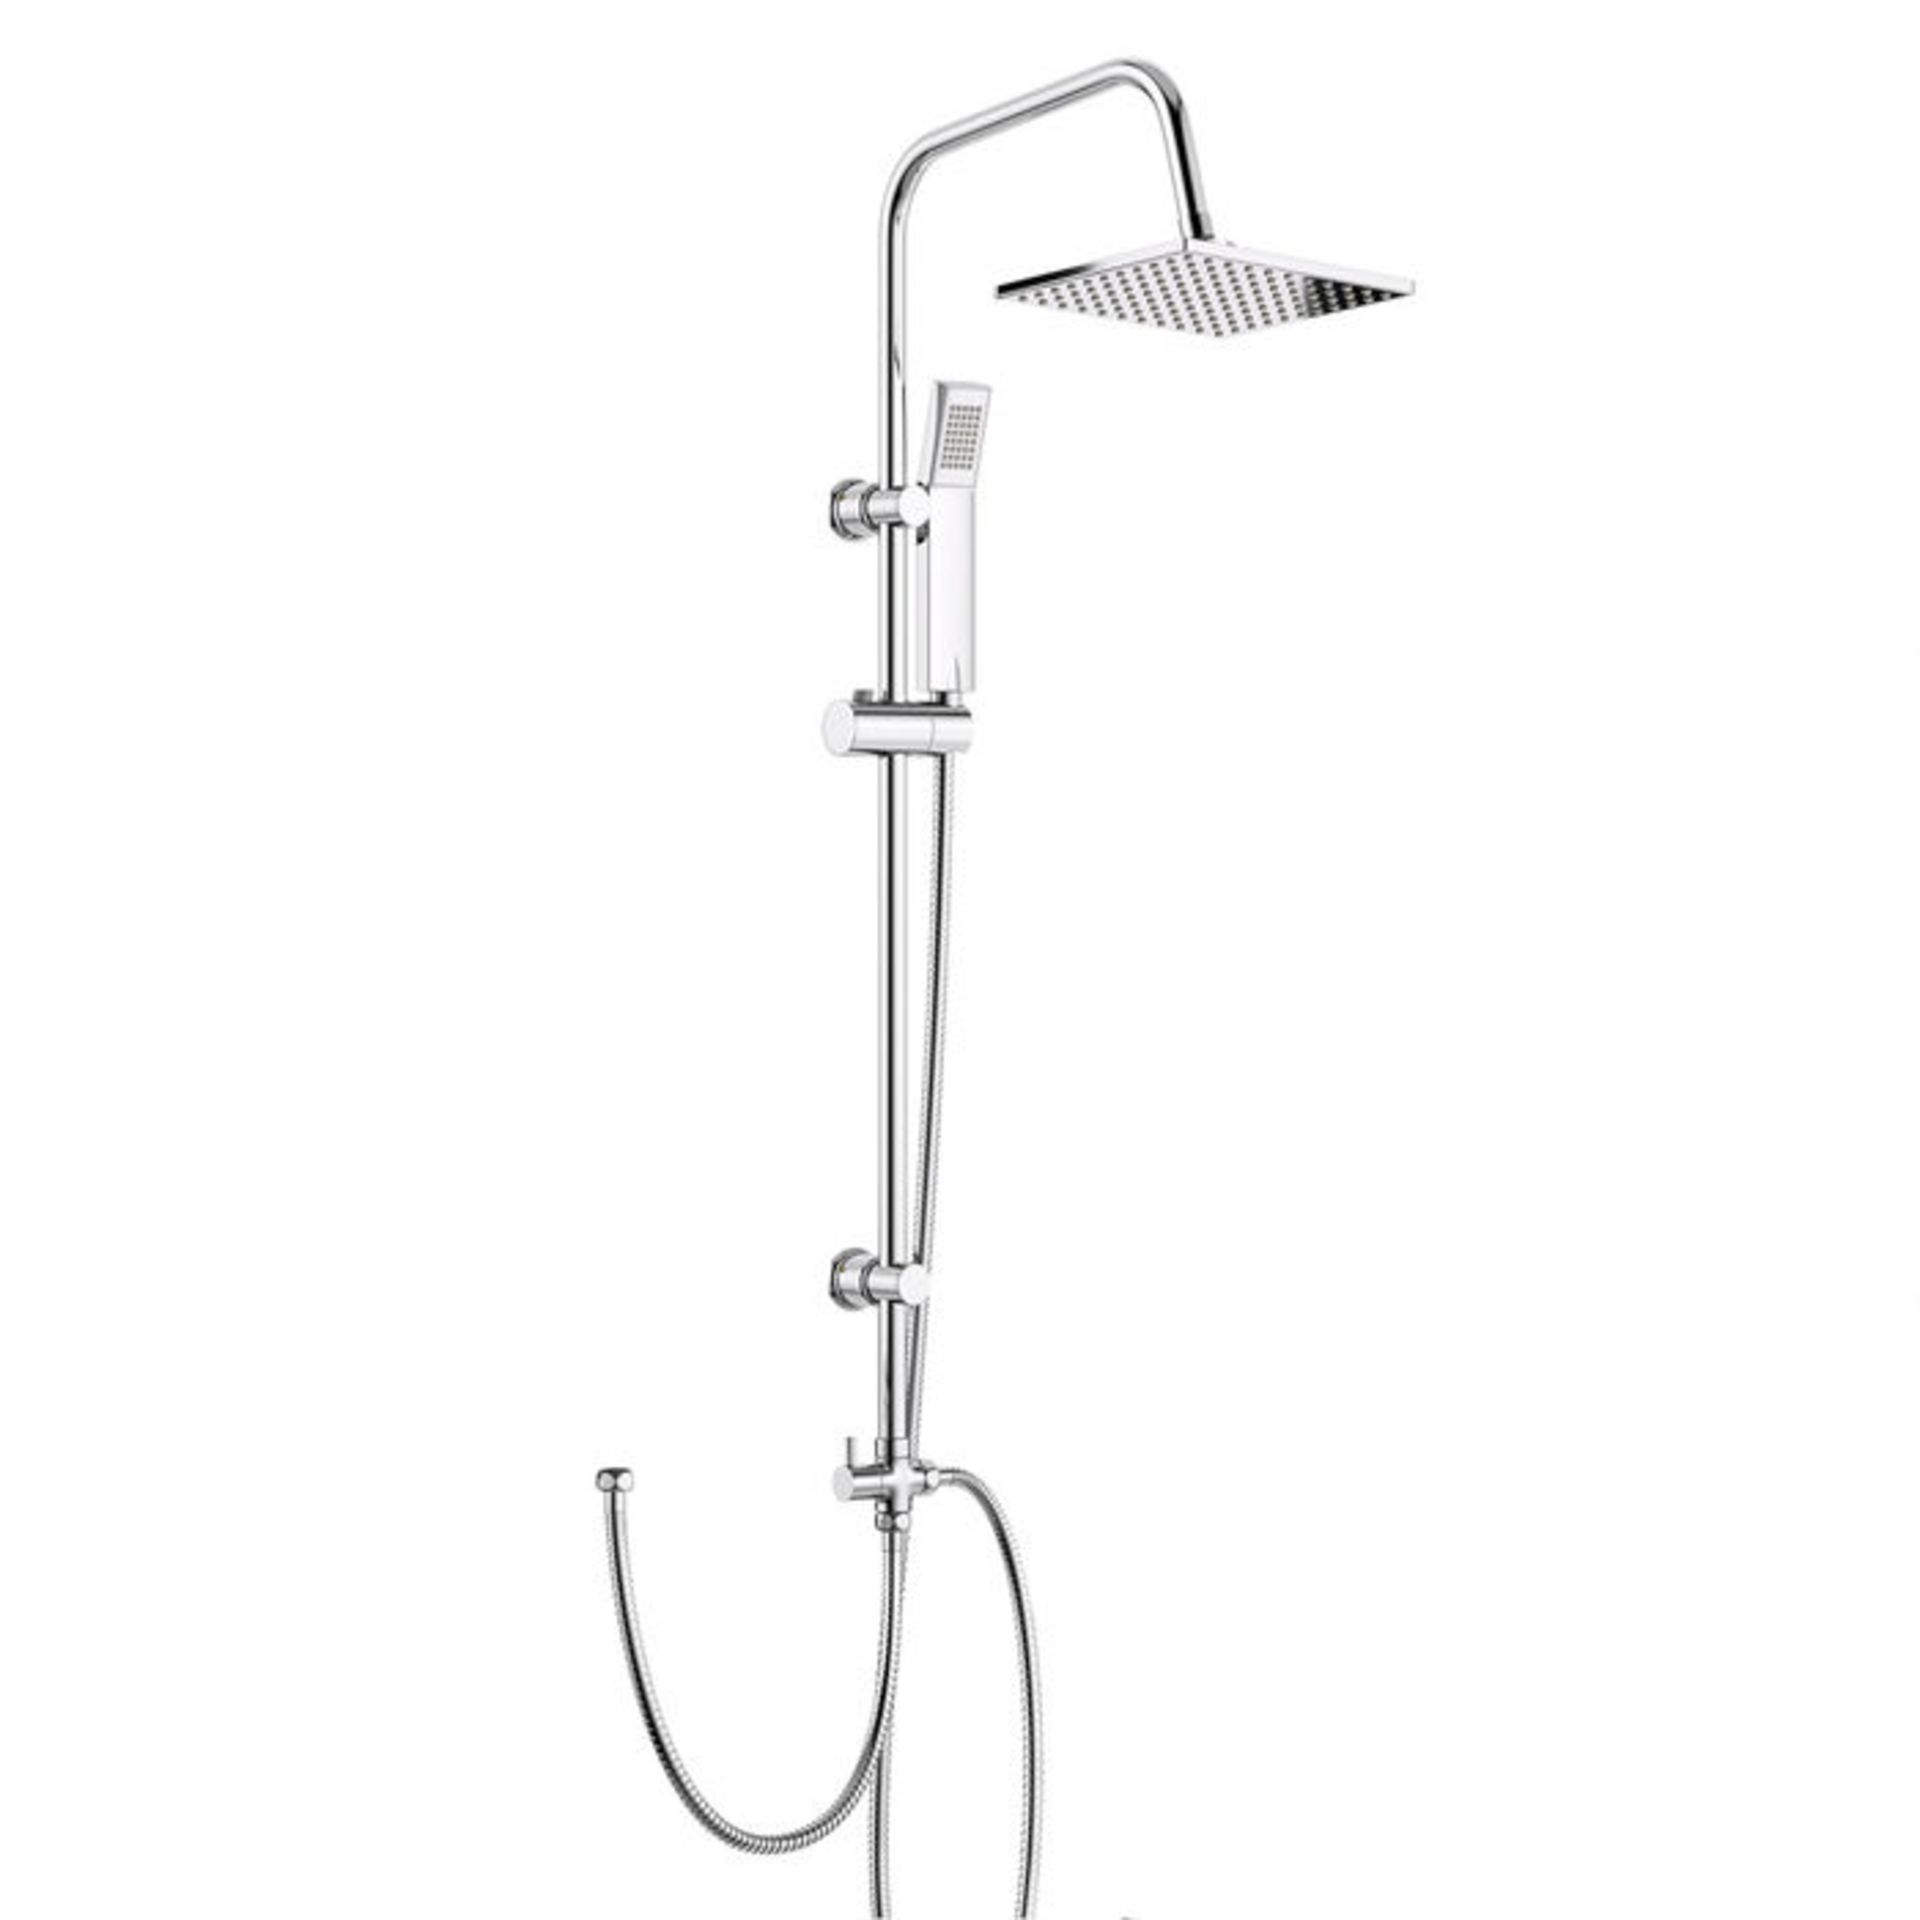 (TS213) 200mm Square Head, Riser Rail & Handheld Kit. Quality stainless steel shower head with - Image 2 of 4